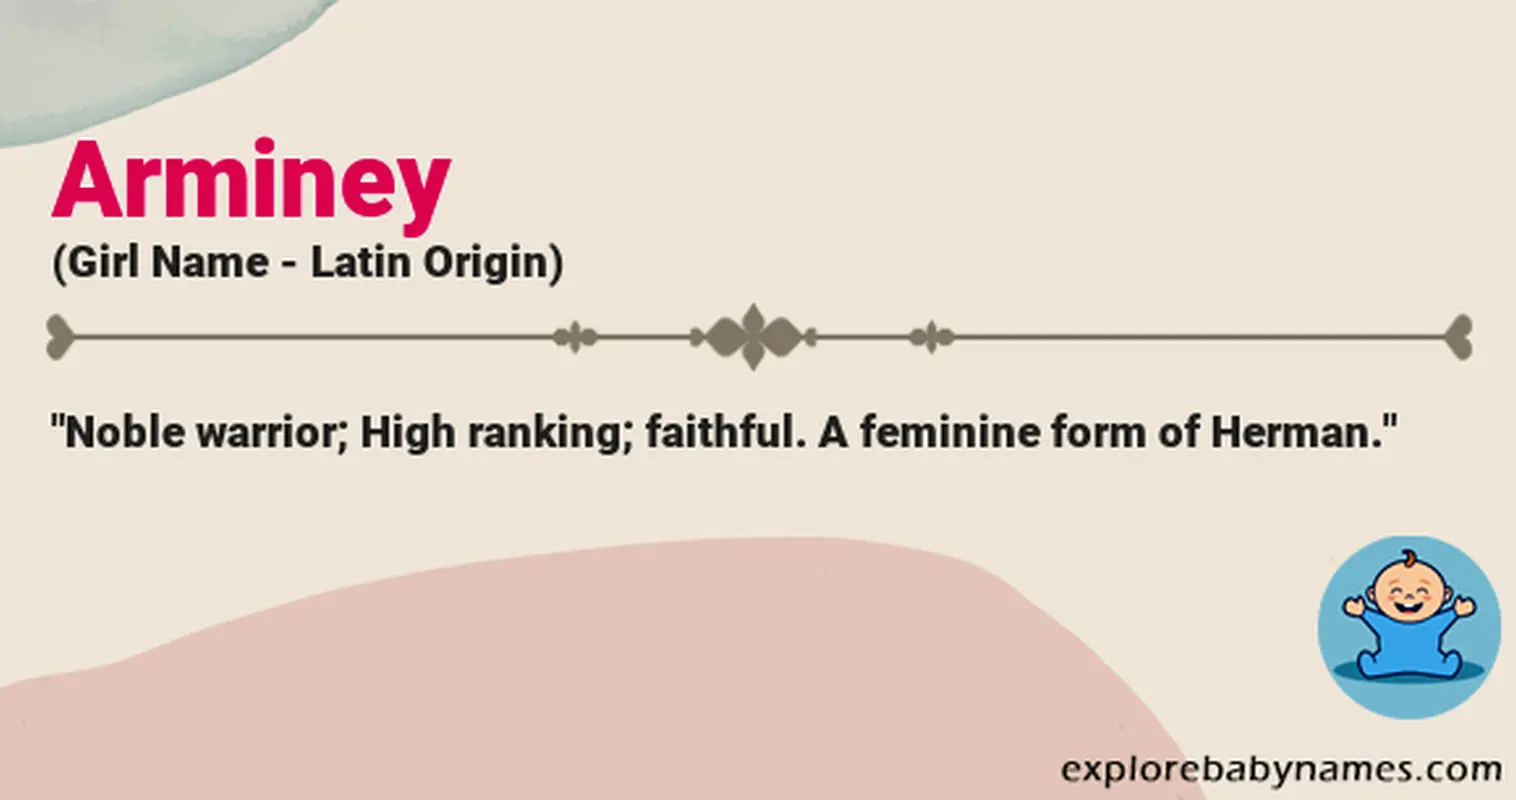 Meaning of Arminey